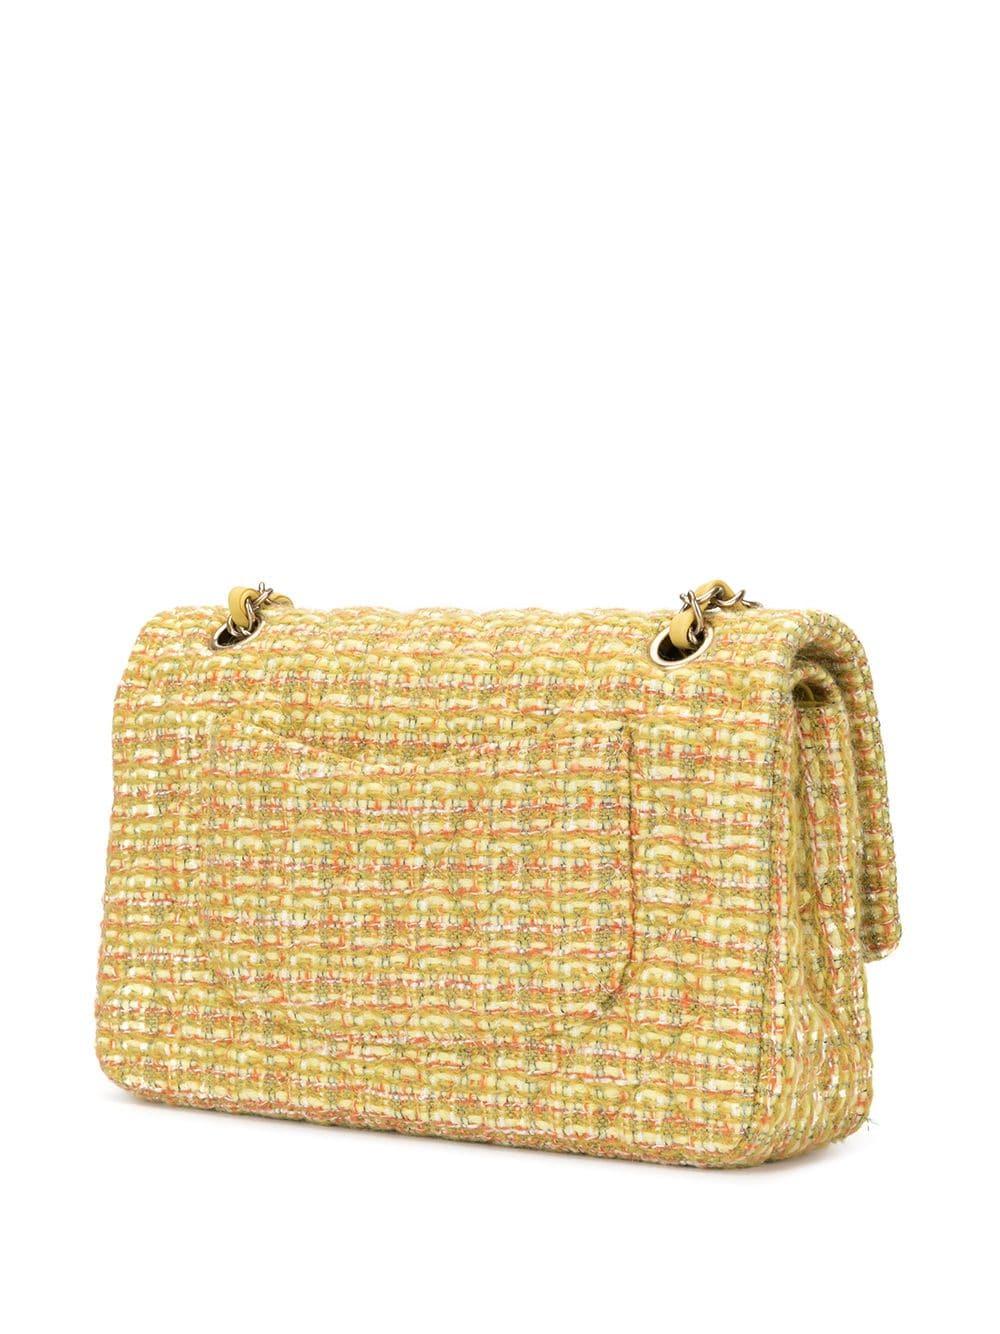 Chanel Classic Flap 2.55 Reissue Fall 2014 Yellow Tweed Shoulder Bag For Sale 3